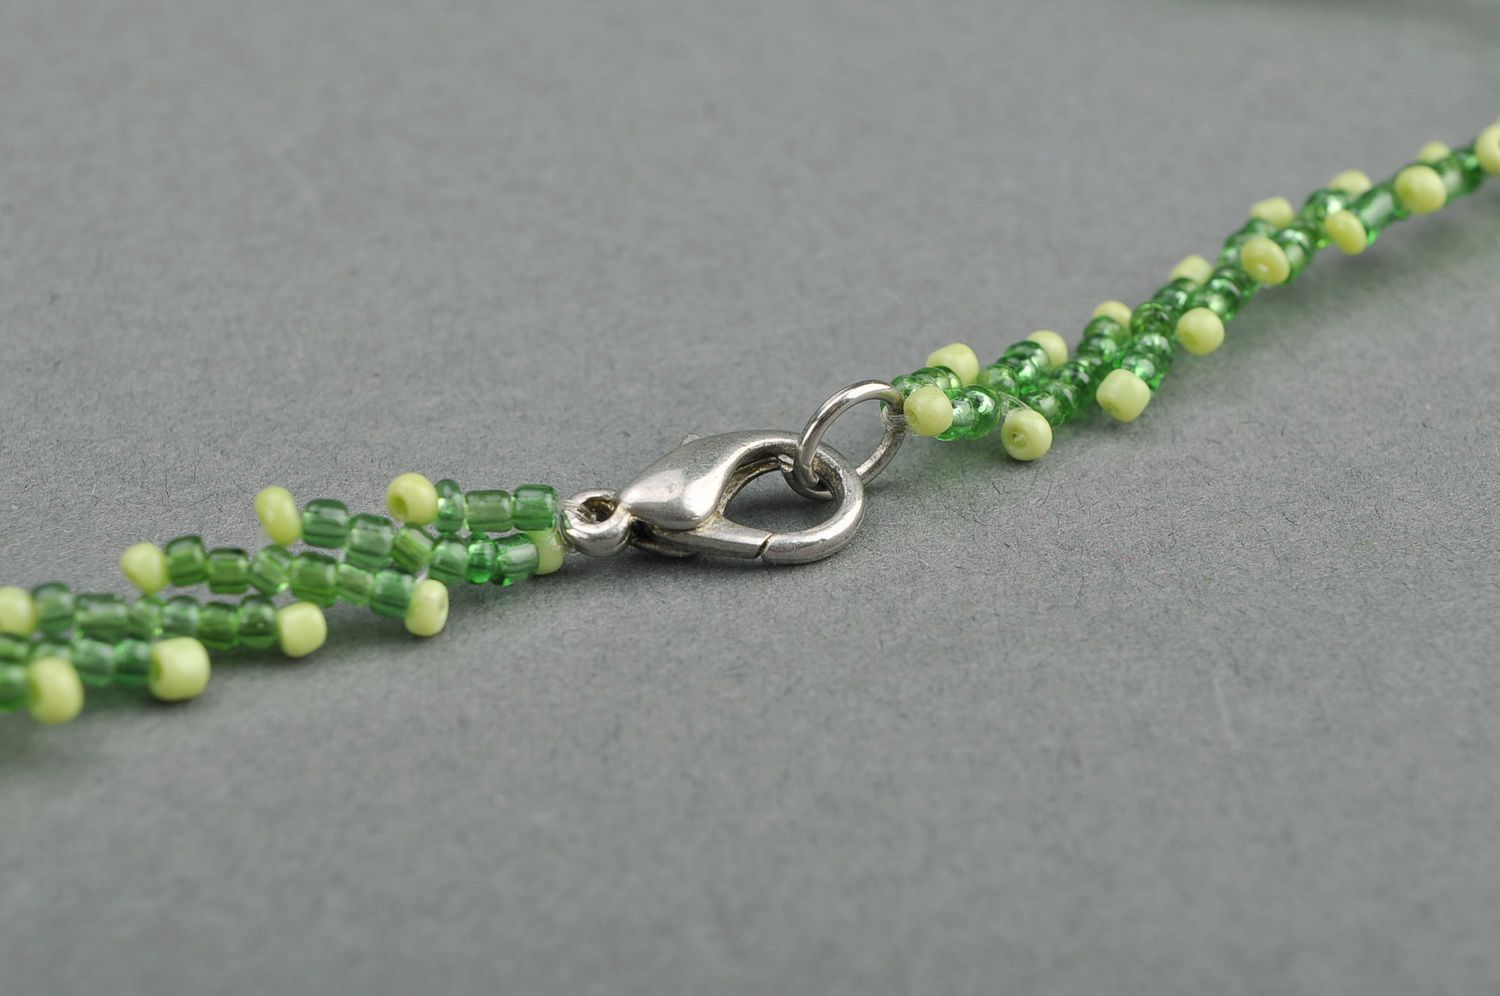 Necklace made from beads Keltic knot photo 2